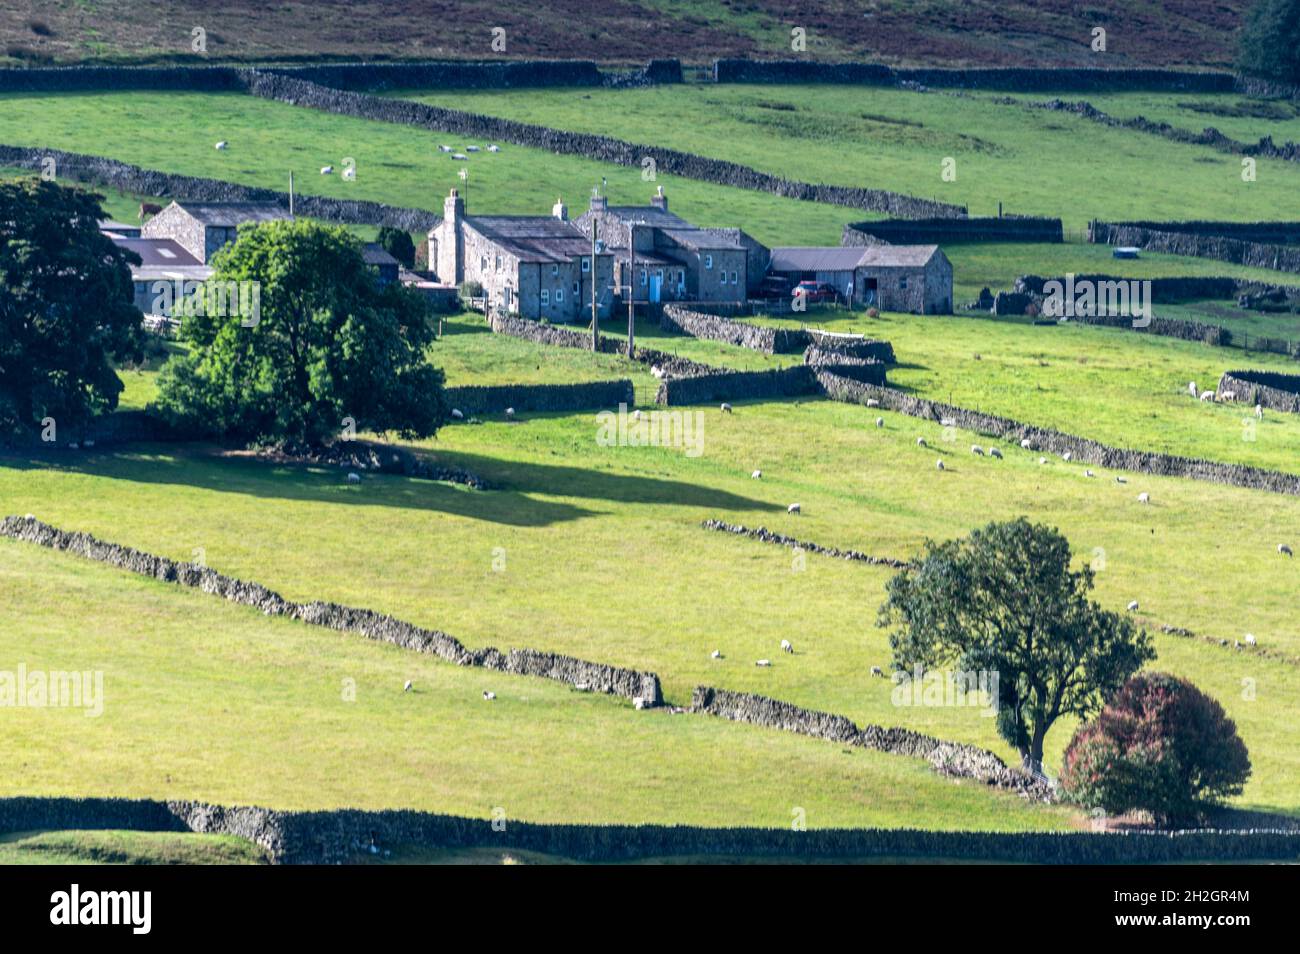 Traditional Yorkshire grey stone-built houses and outbuildings with agricultural land divided up with drystone walls in Swaledale near the small villa Stock Photo